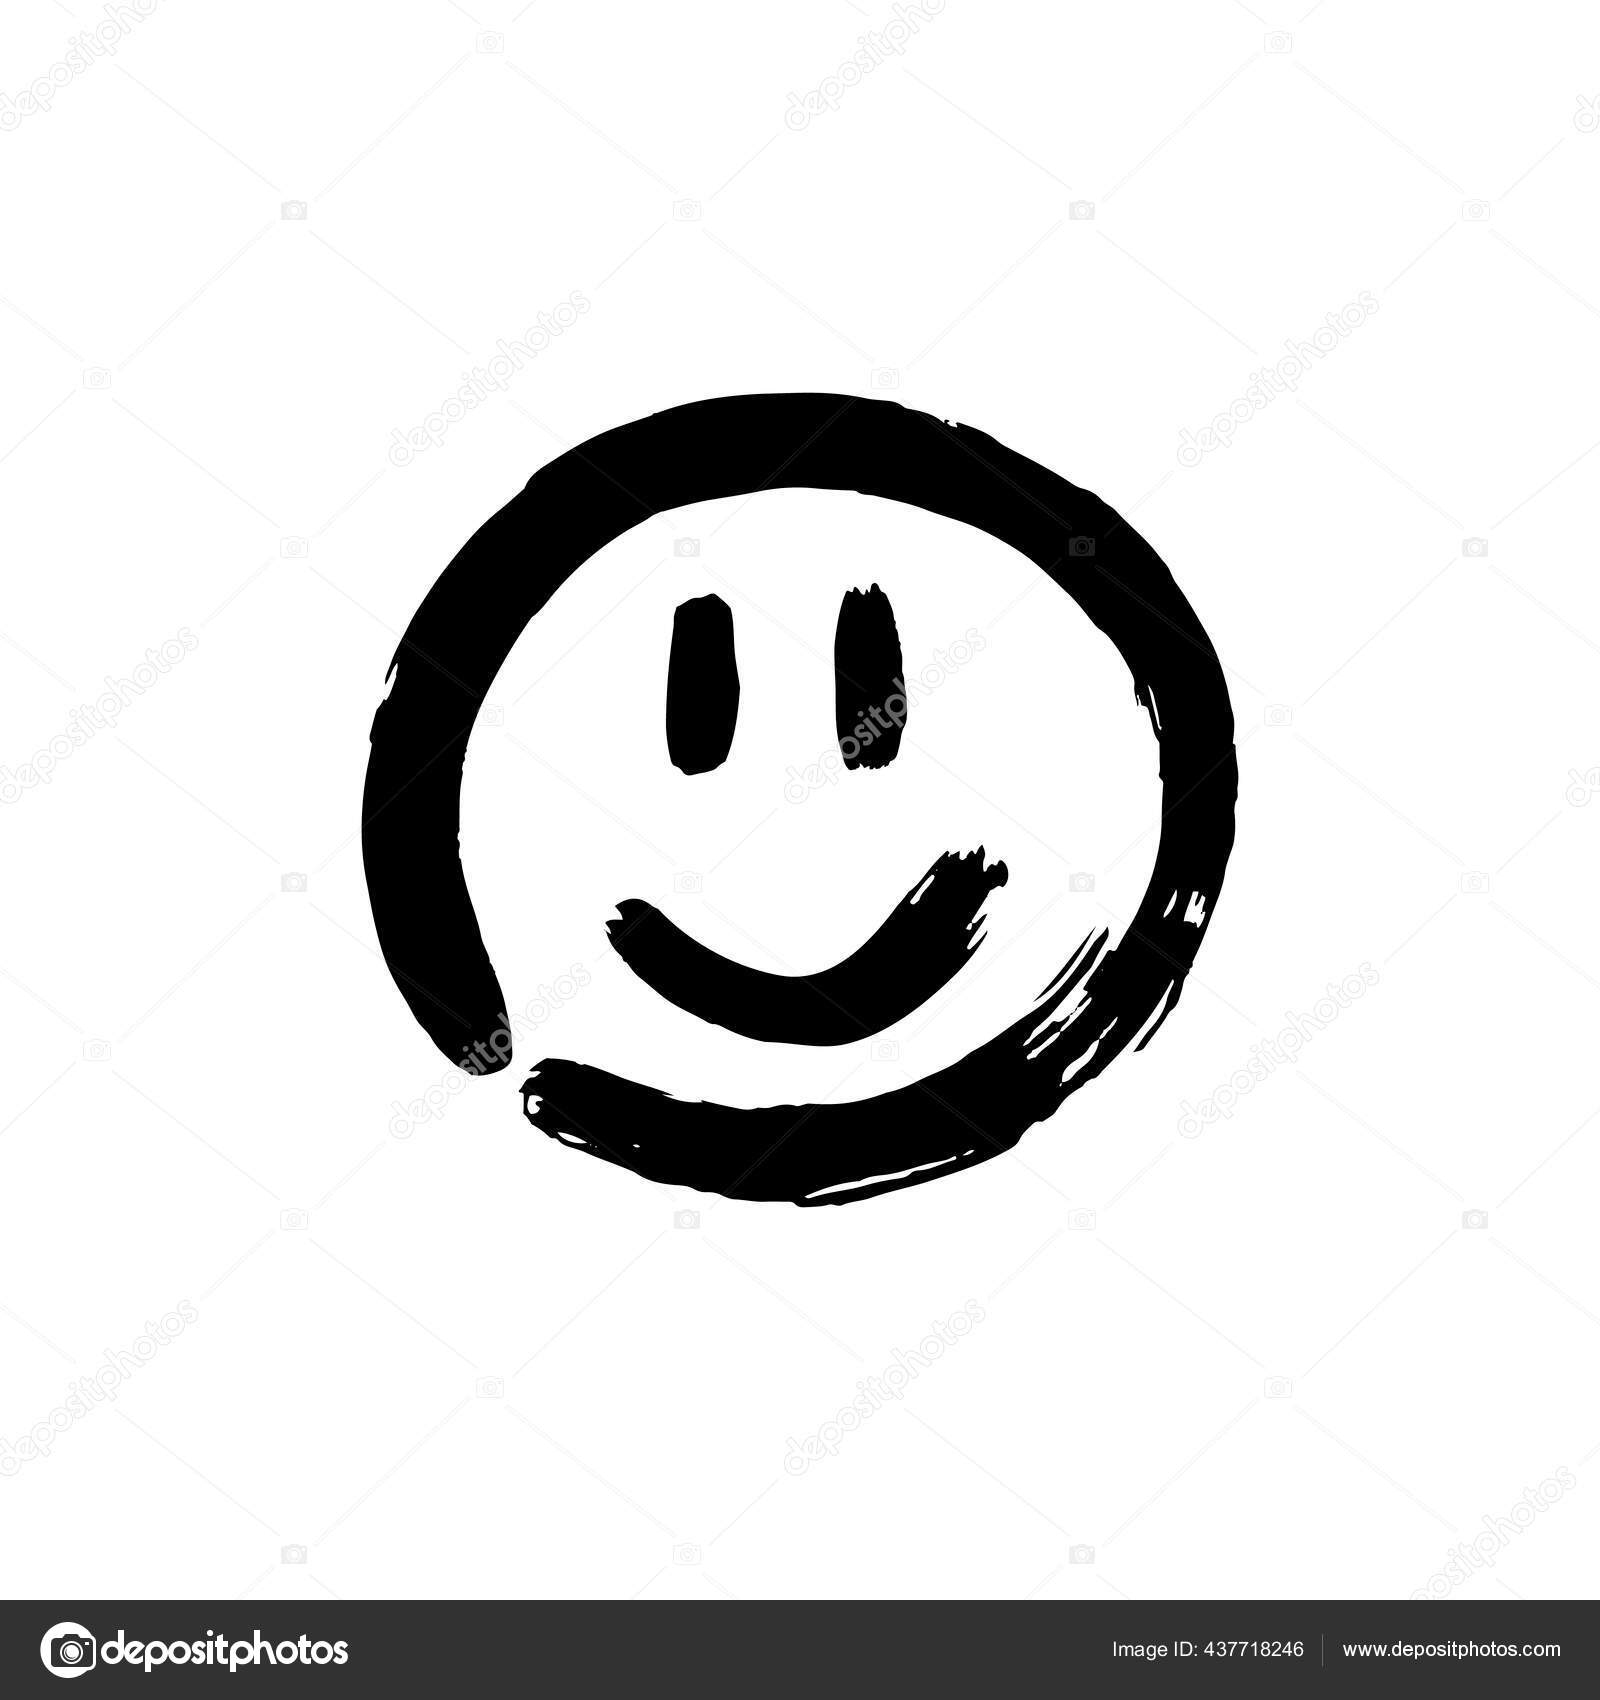 Smile winking face doodle icon. Emoticon in hand drawn style